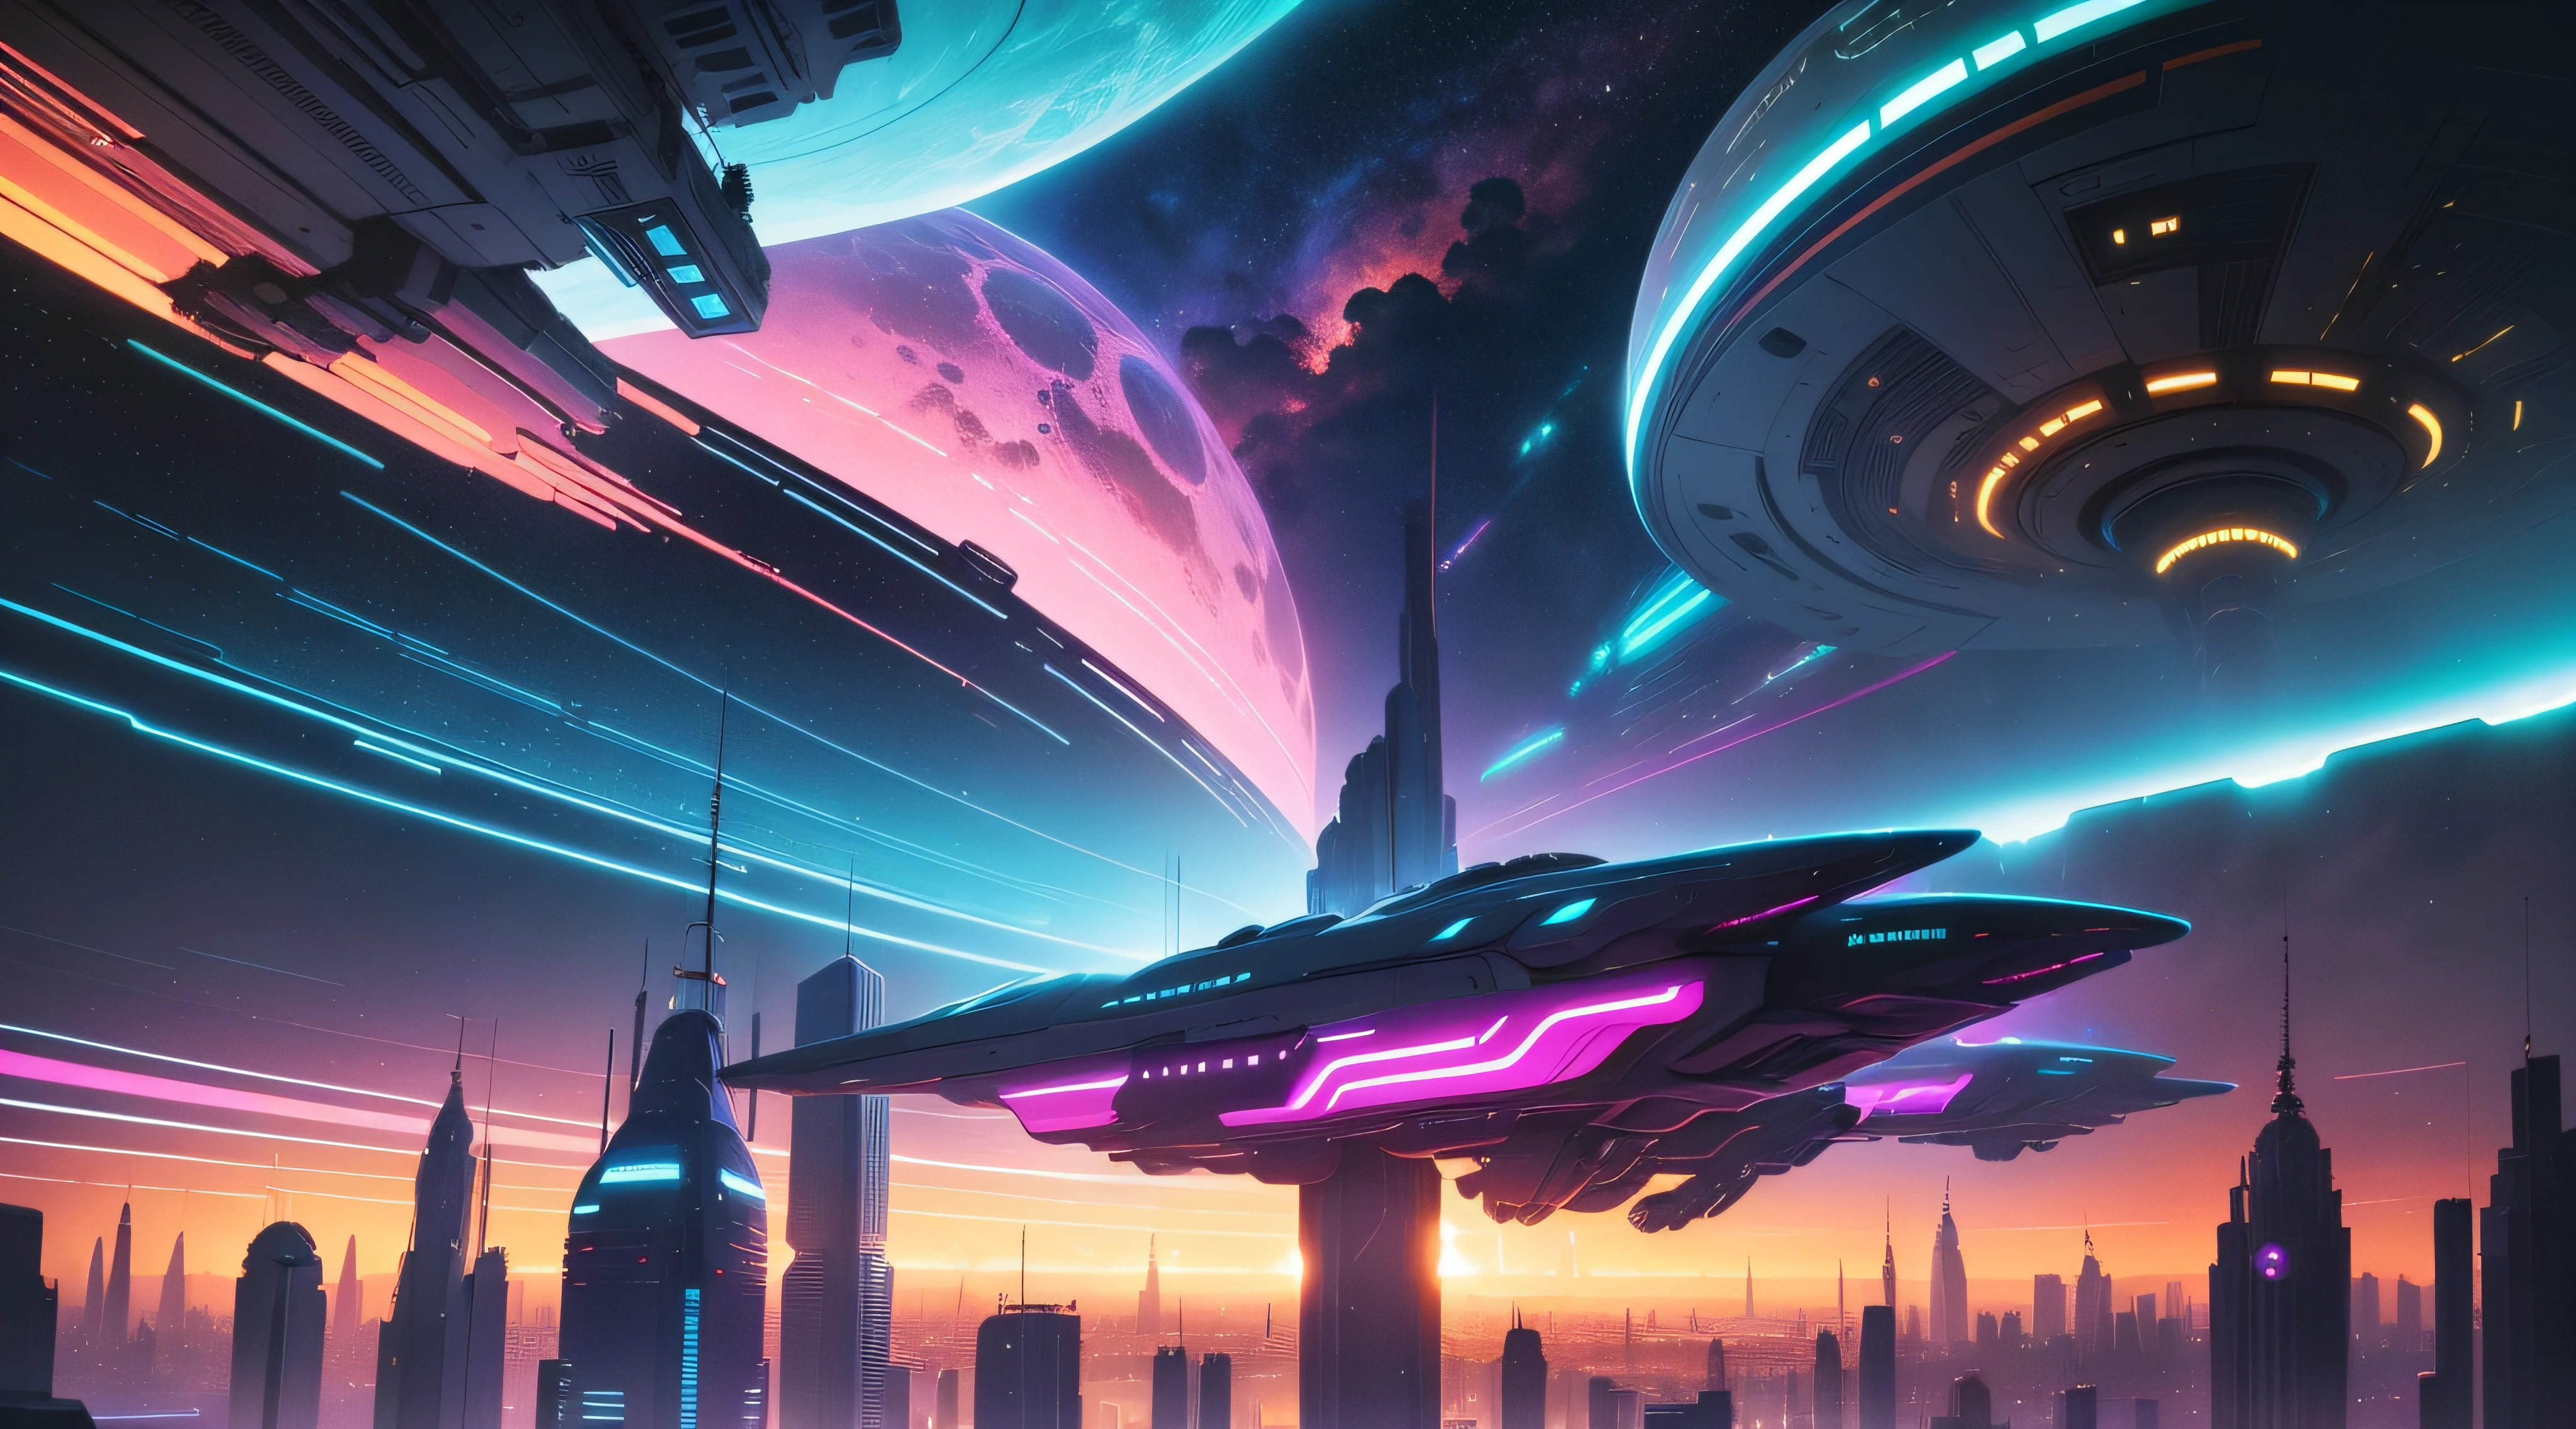 spaceships flying over a city with a rainbow colored sky, sci-fi digital painting, sci fi digital painting, by sparth, futuristic digital painting, sci-fi digital art illustration, retrofuturistic digital painting, sparth style, colorful dystopian futurism, borne space library artwork, jen bartel, inspired by Stephan Martiniere, inspired by Stephan Martinière